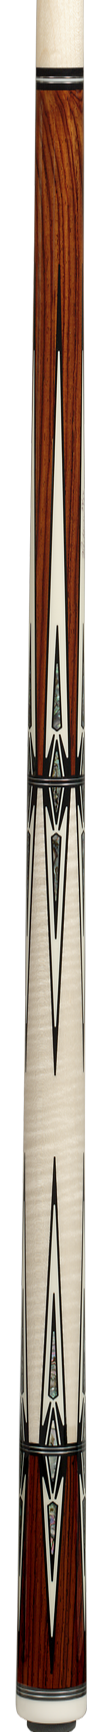 Pechauer Pechauer PL-29 Limited Edition Pool Cue Pool Cue